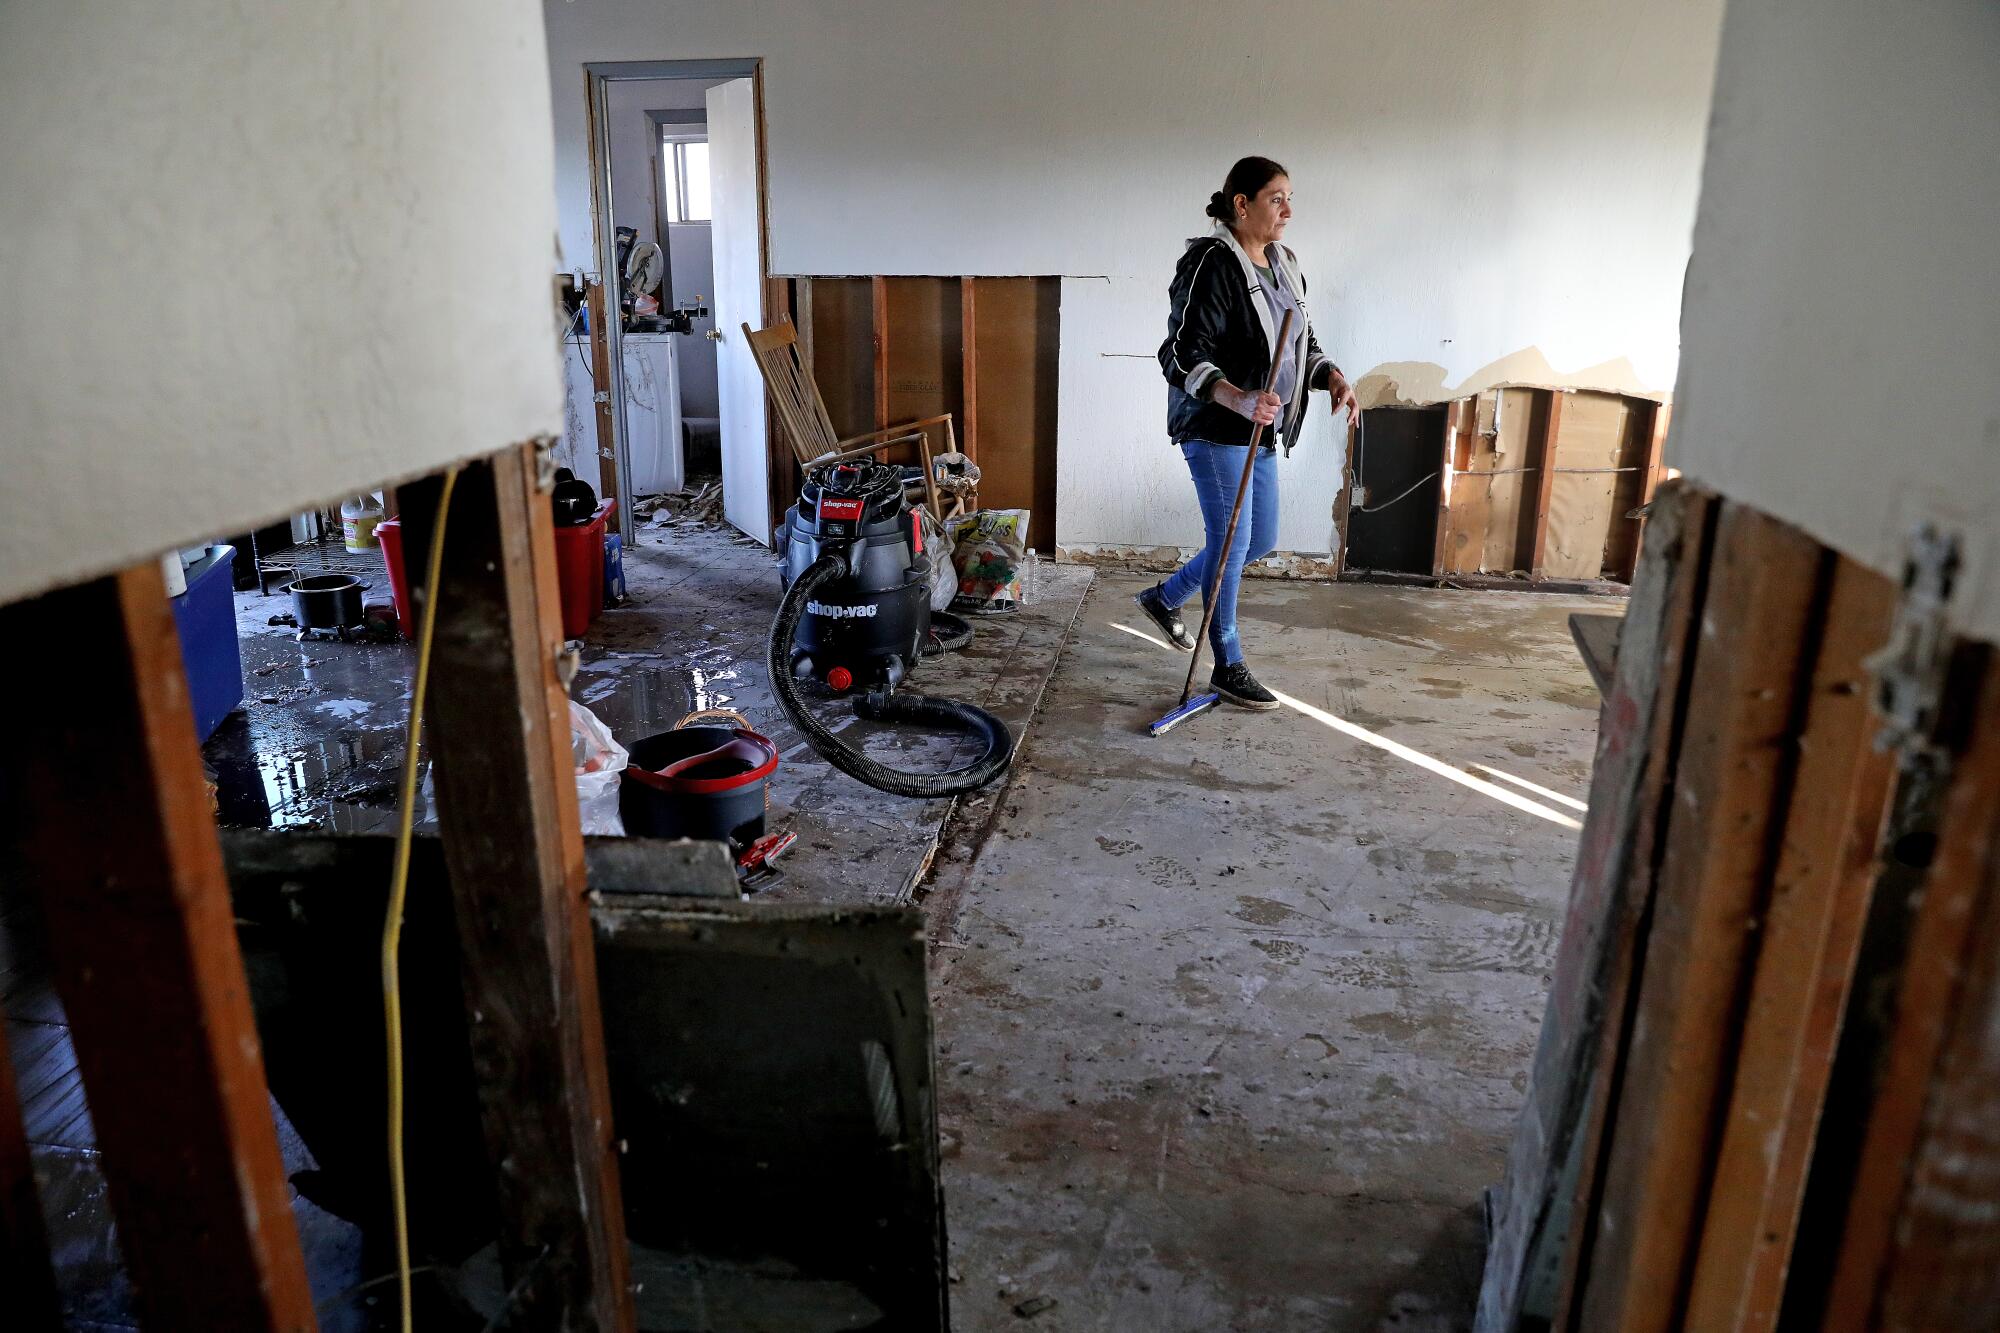 A woman walks across a concrete floor inside a home; sections of drywall have been removed, exposing boards.